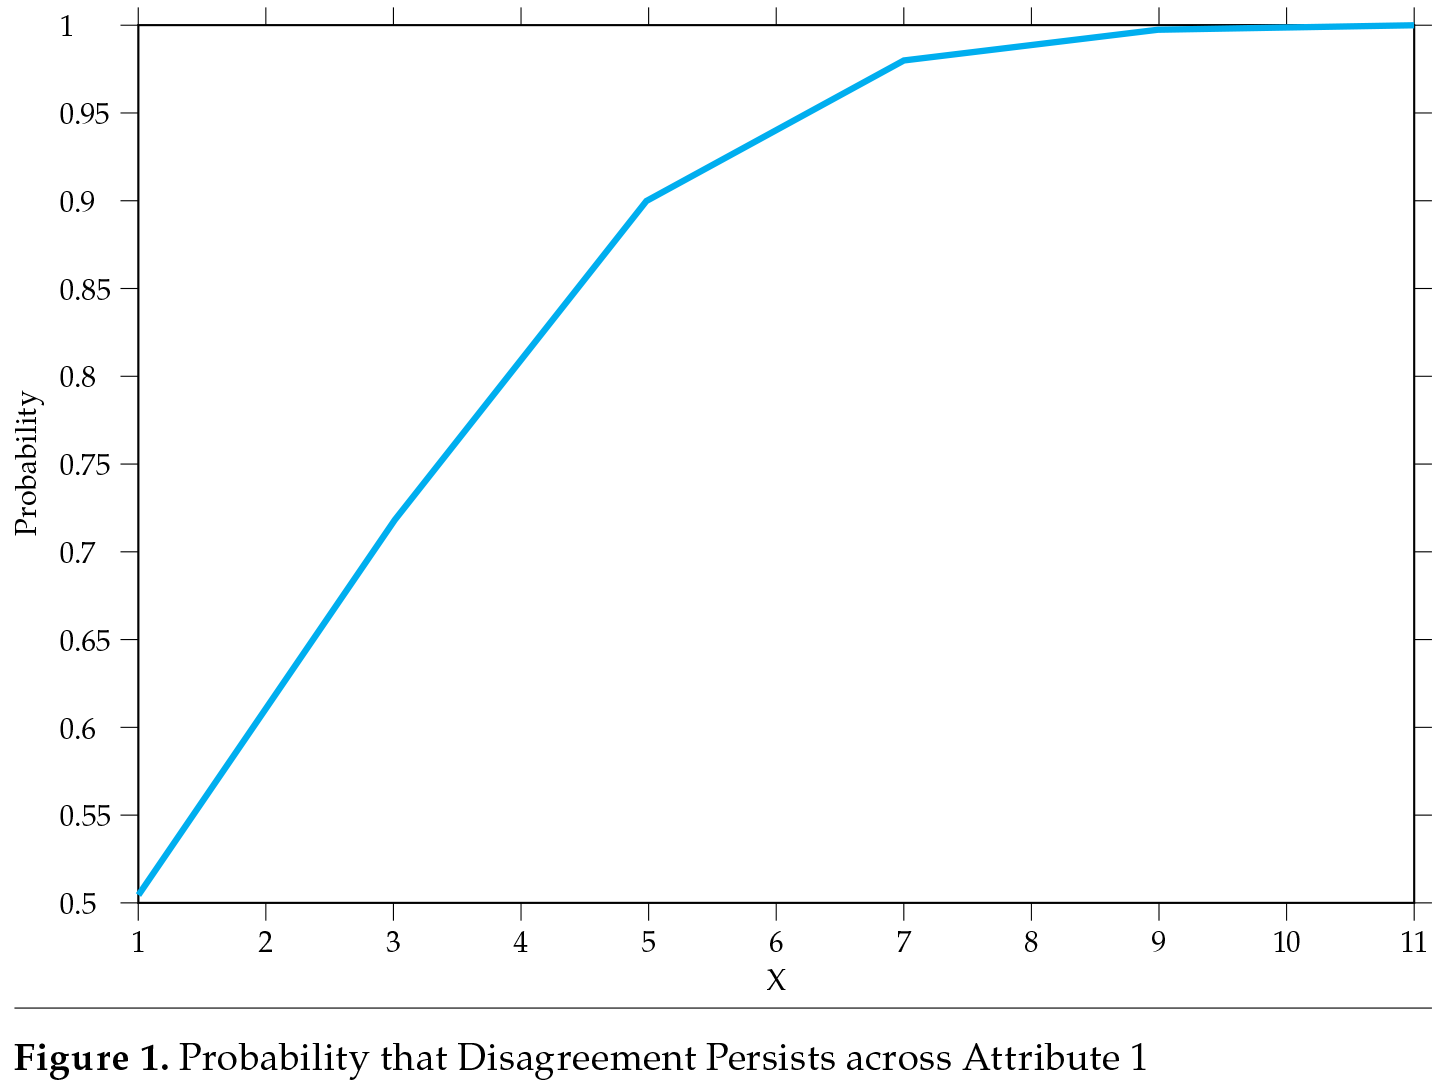 Probability that Disagreement Persists across Attribute 1